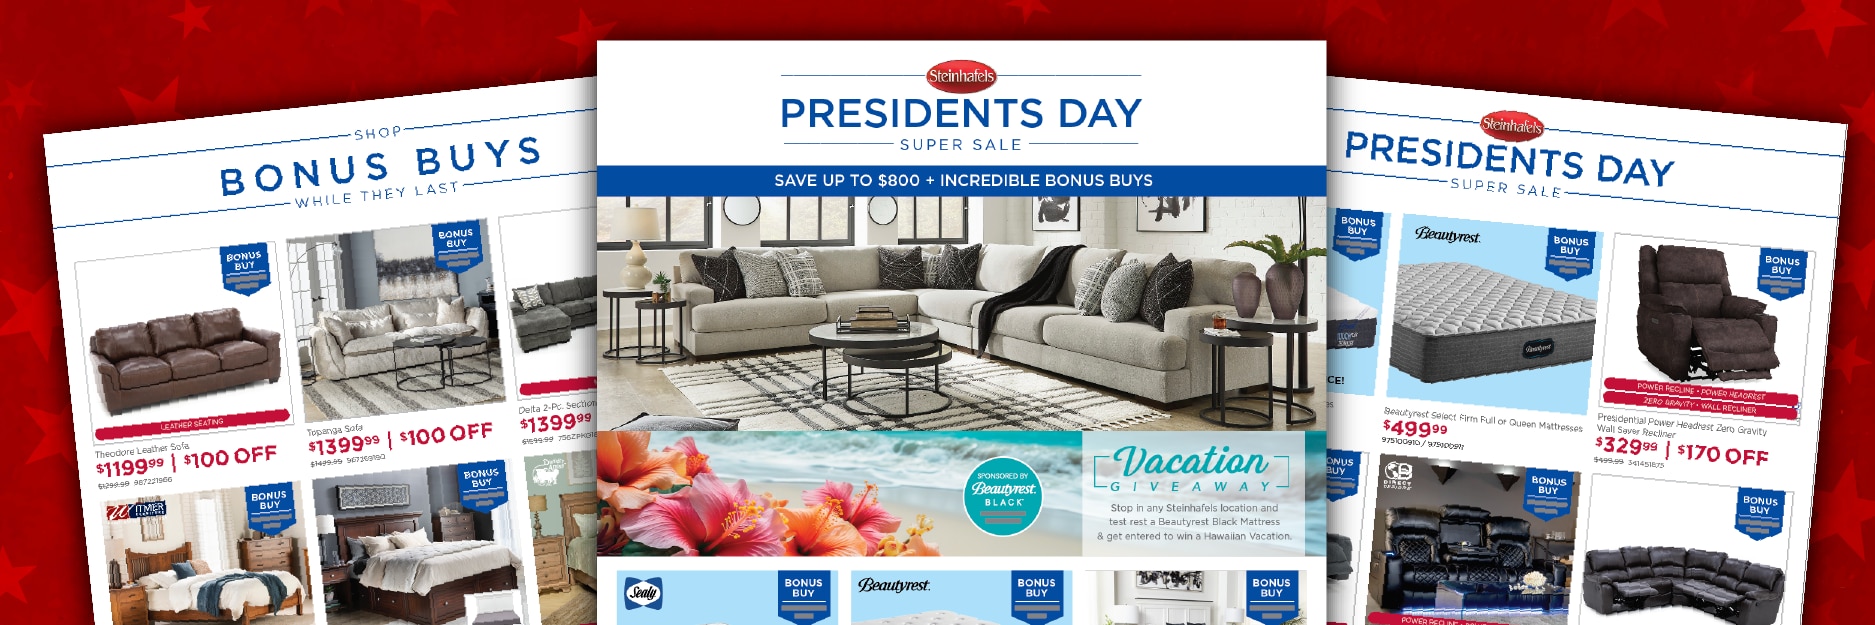 presidents day sale book